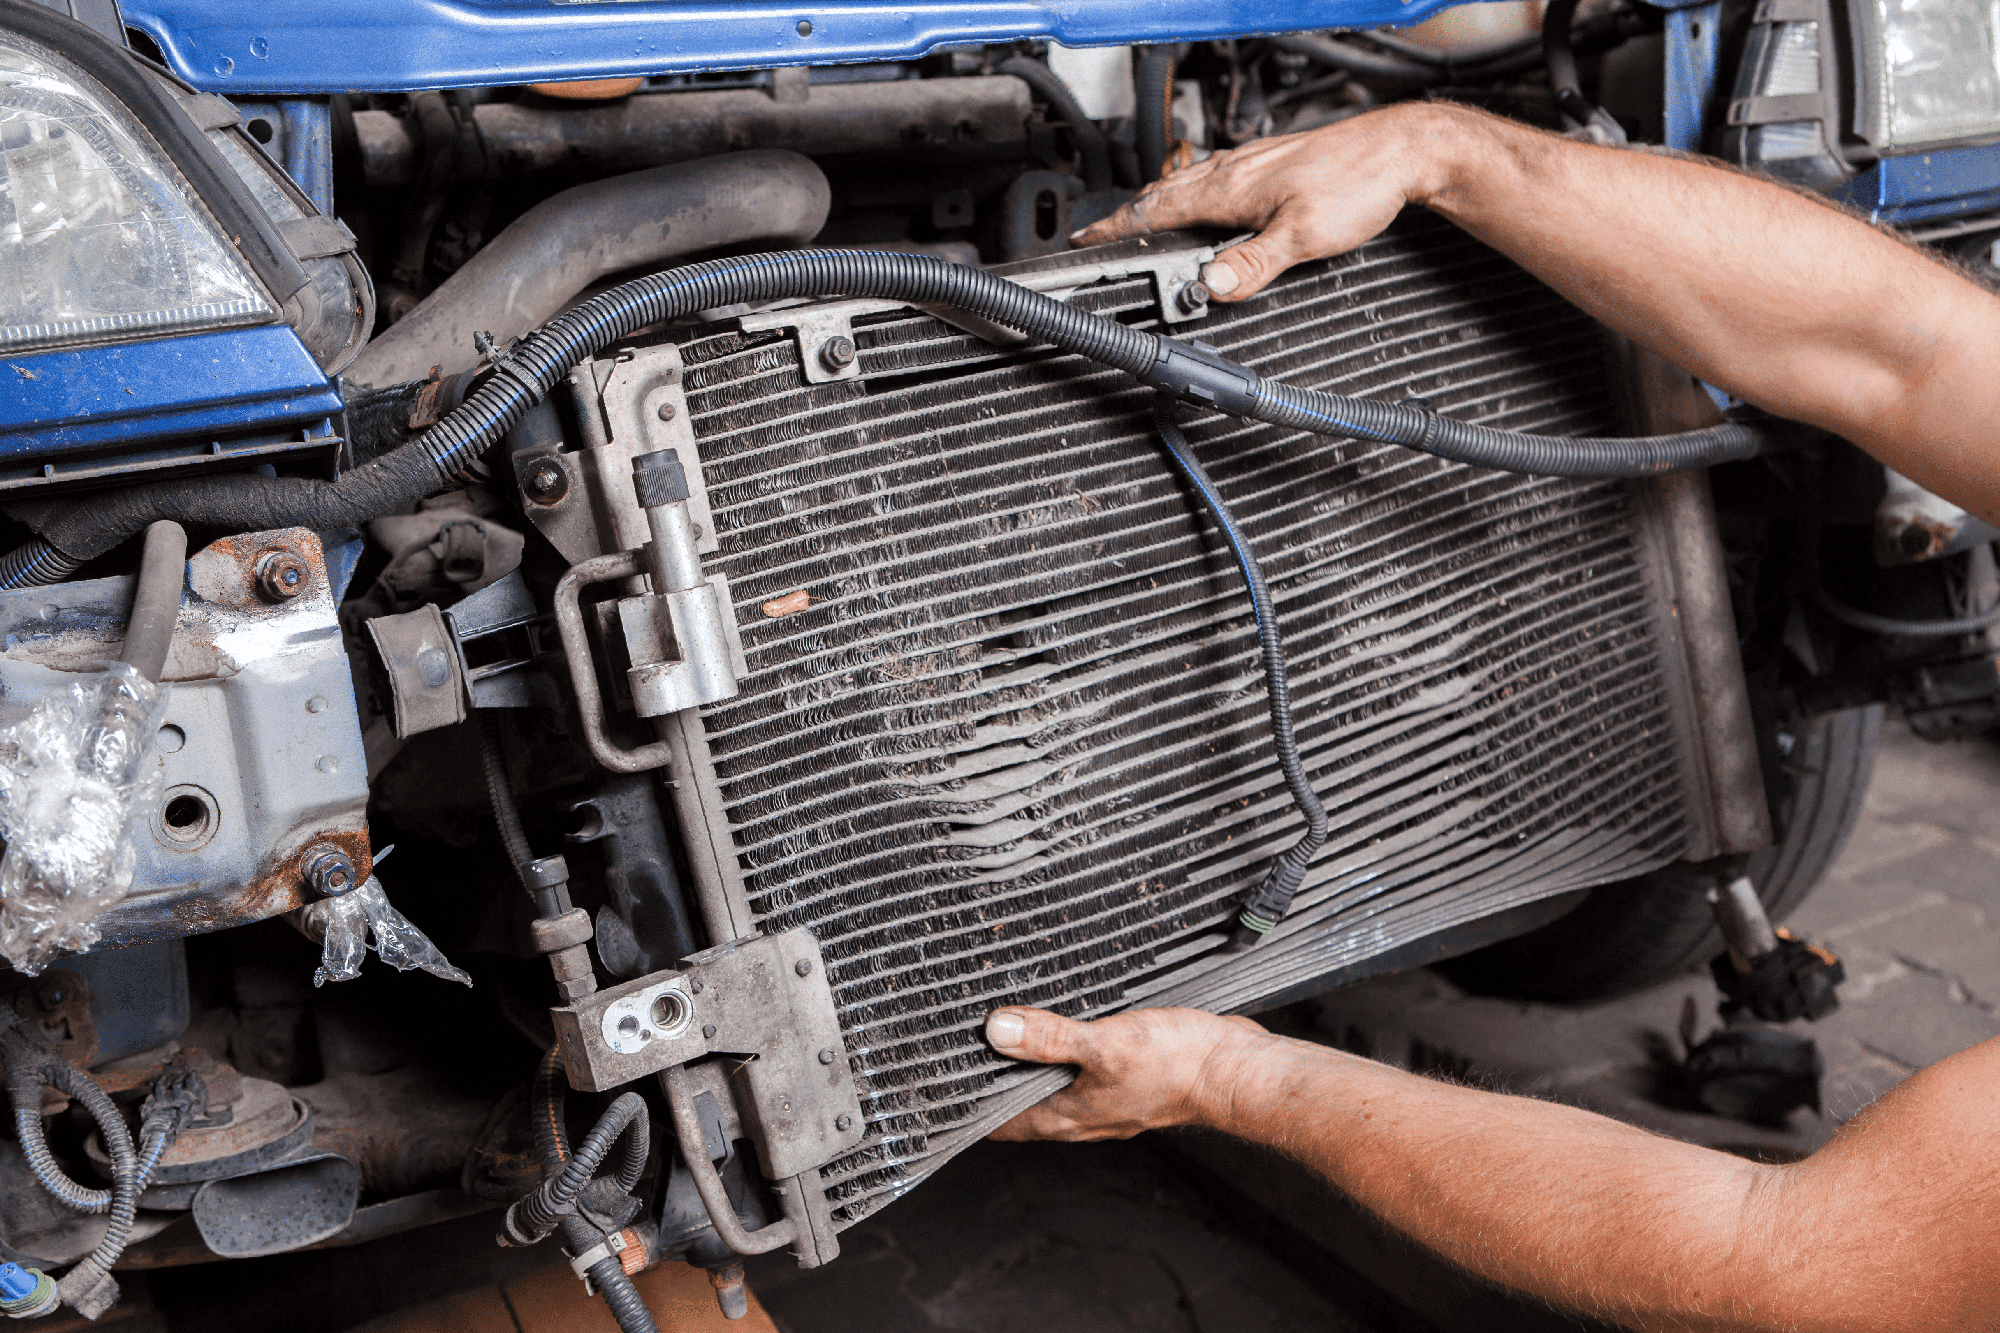 The Cost of Neglecting Your Radiator: Potential Risks and Damages